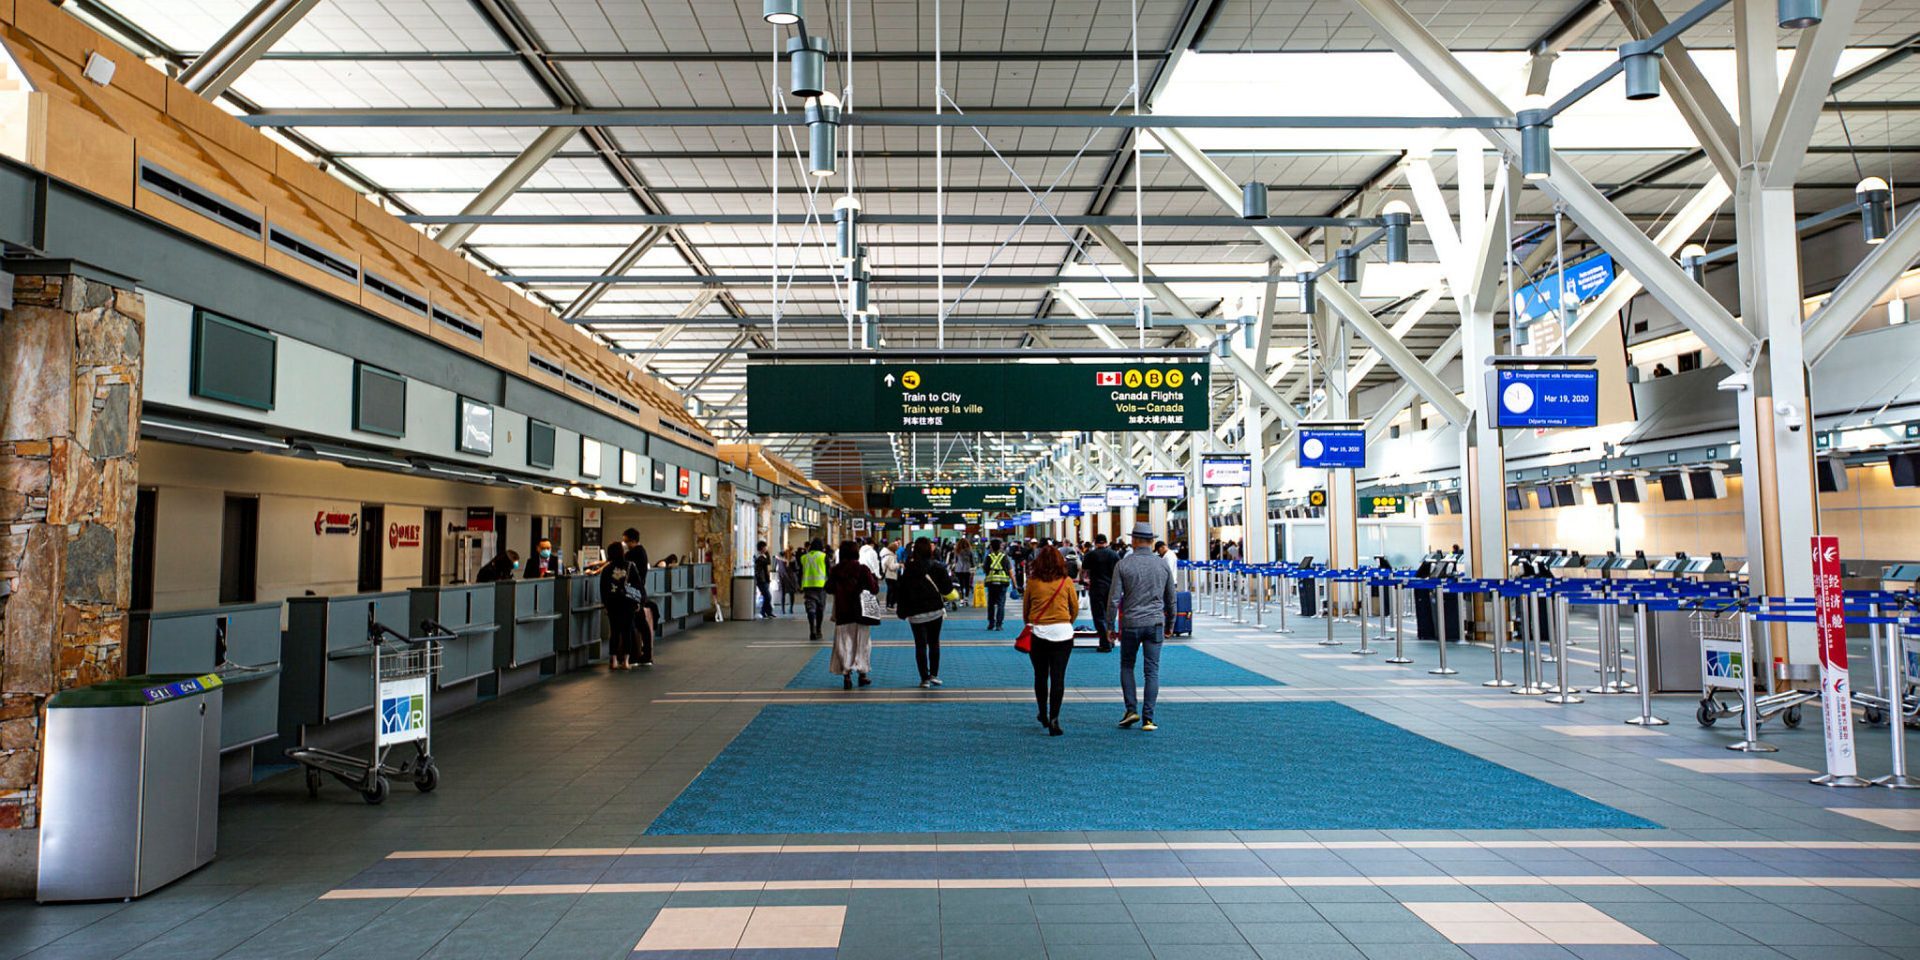 Vancouver airport. Photograph courtesy of Wikimedia commons